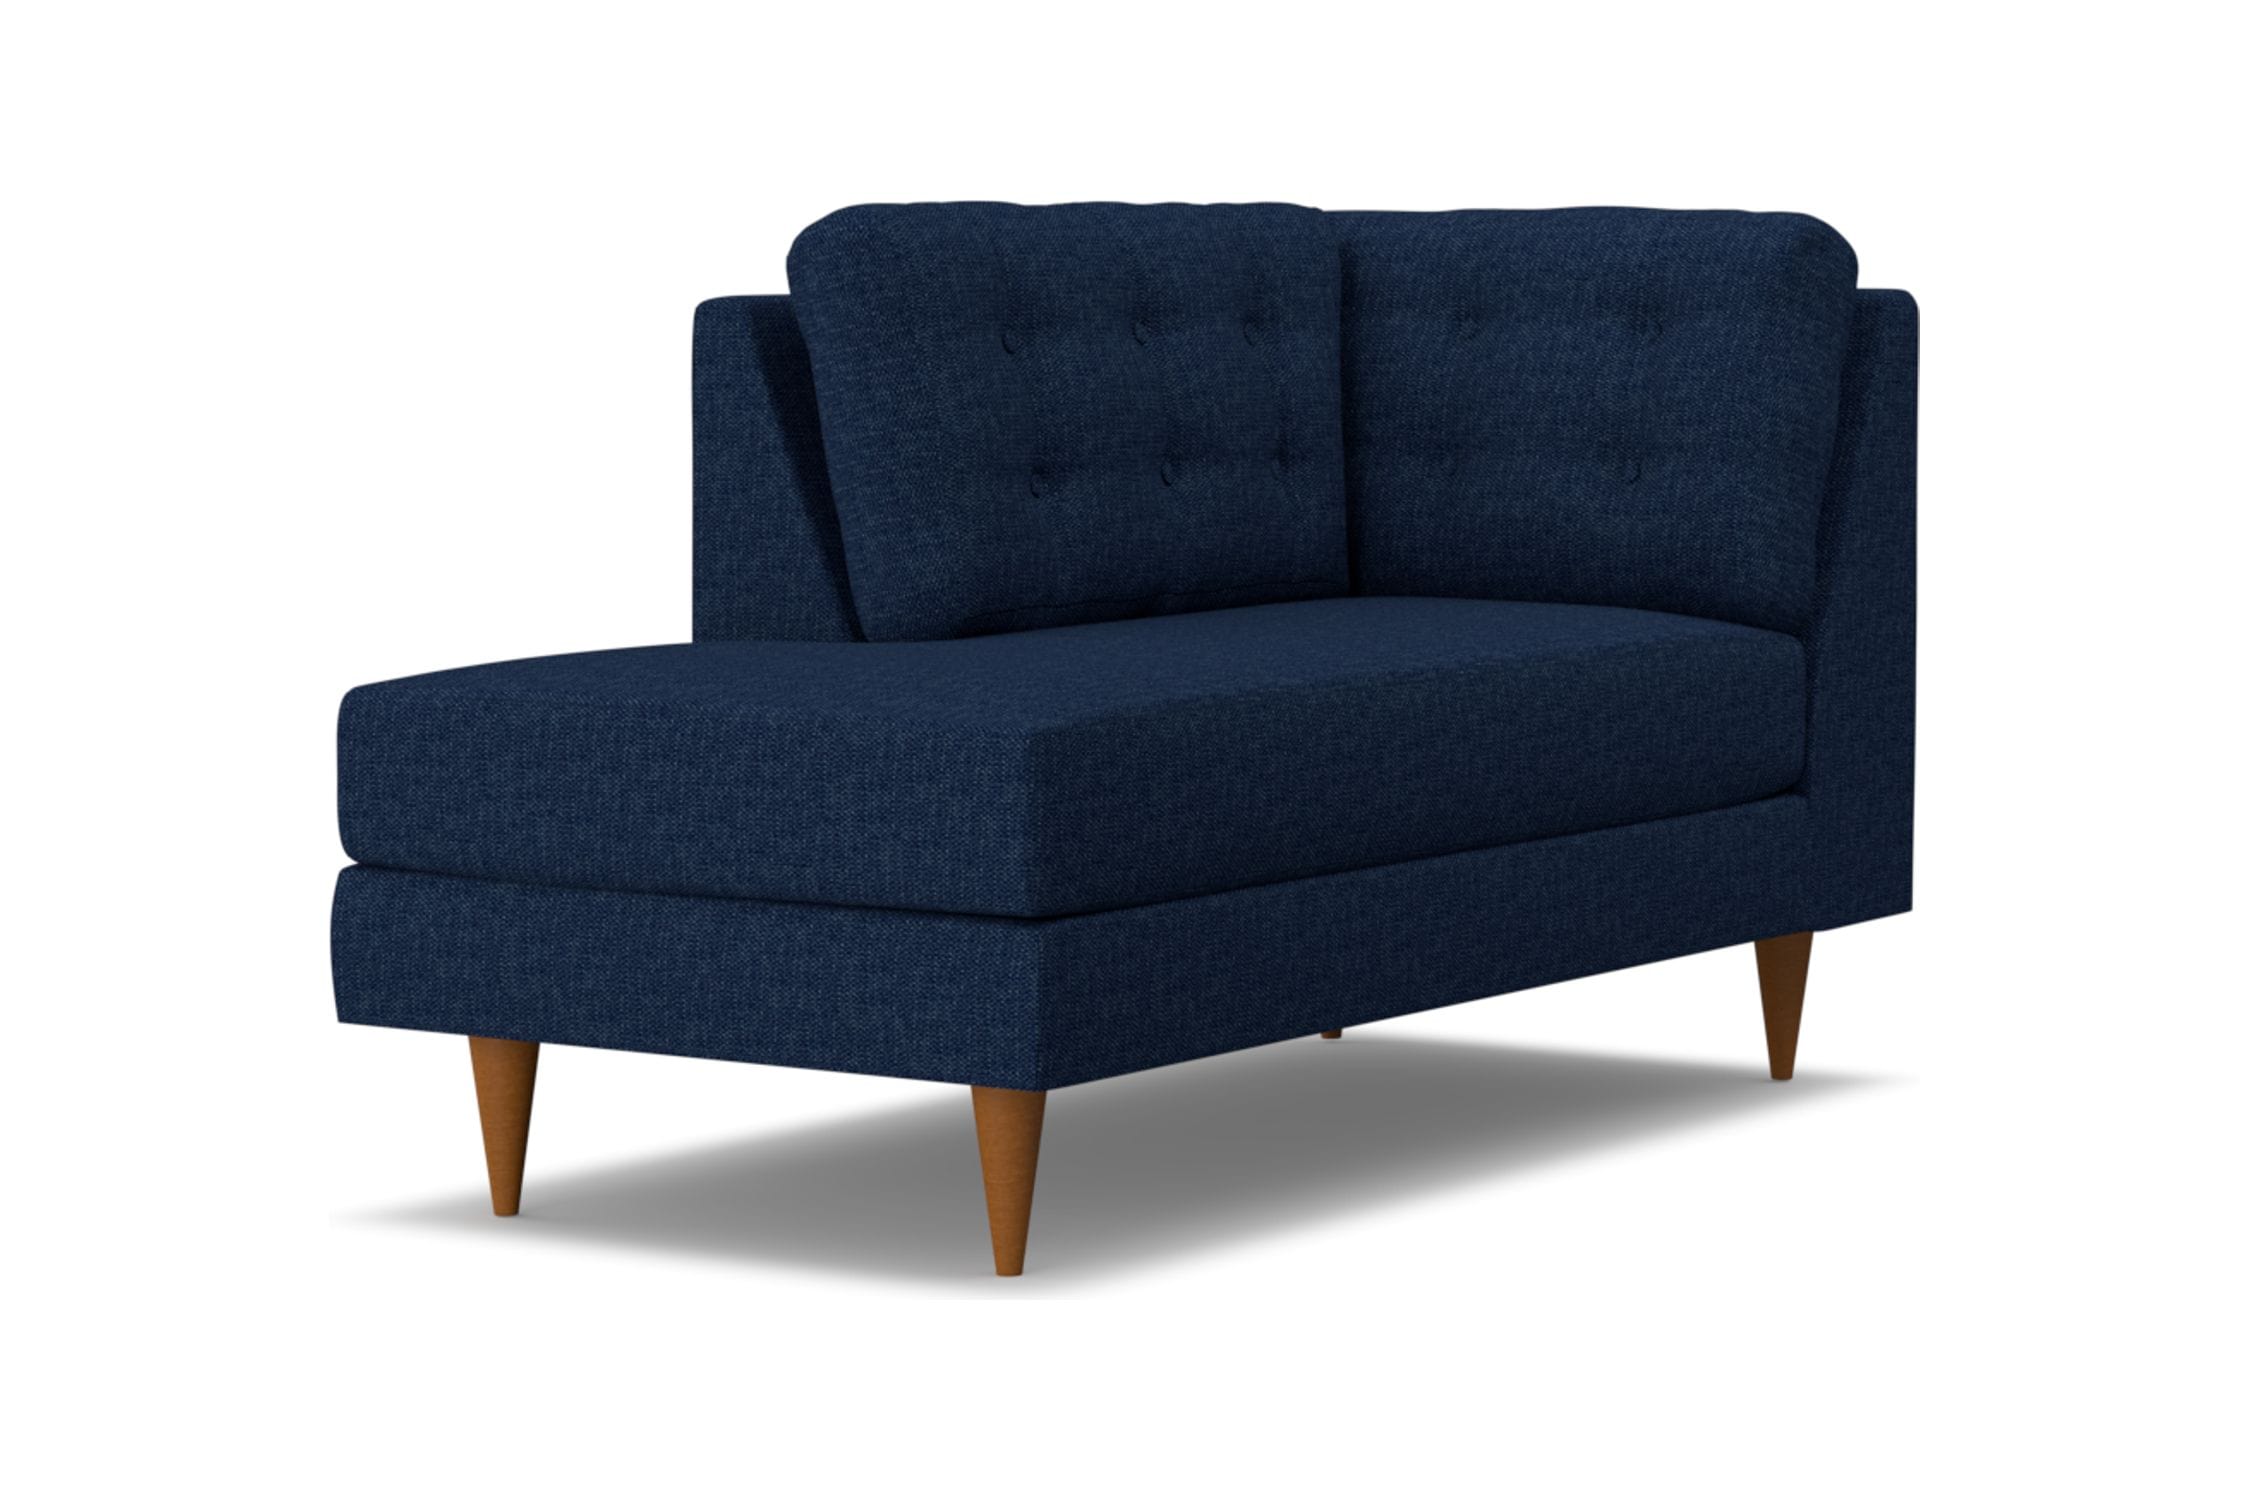 Logan Left Arm Chaise - Dark Blue -  Modular Collection - Build Your Own Sectional